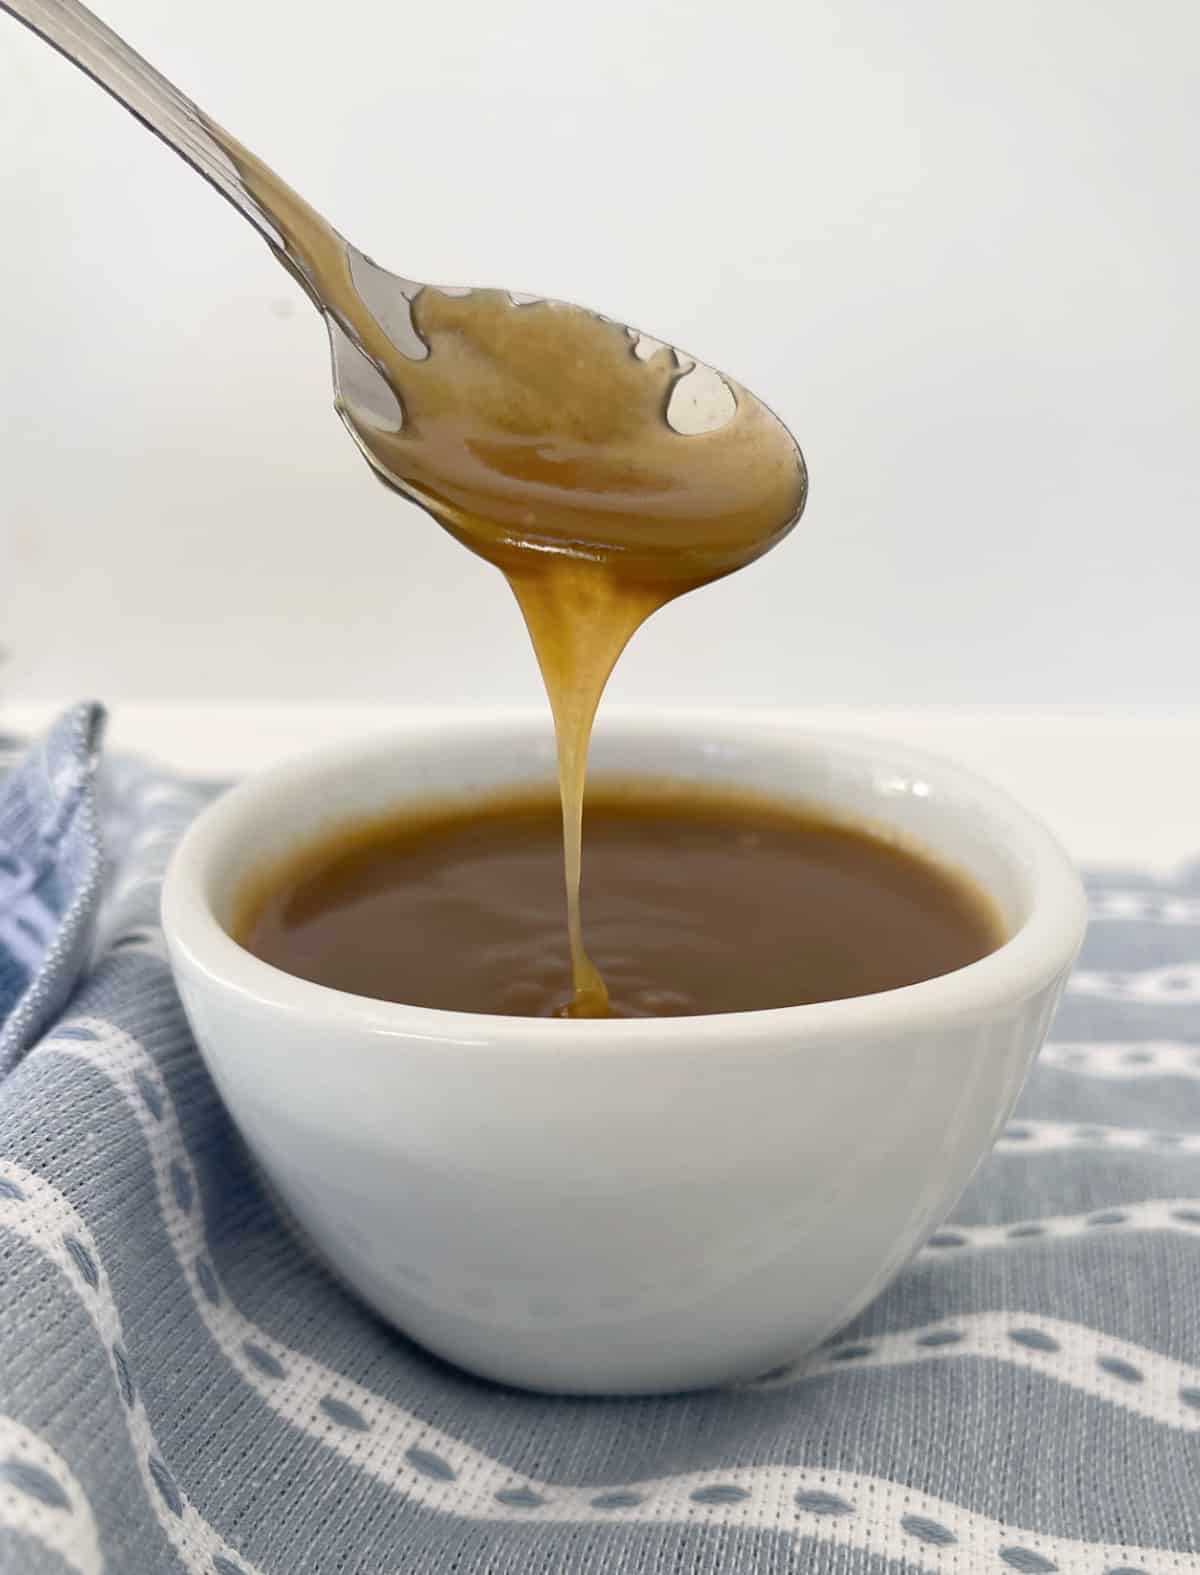 Spoon drizzling salted caramel sauce into a white bowl that is sitting on a blue striped towel.